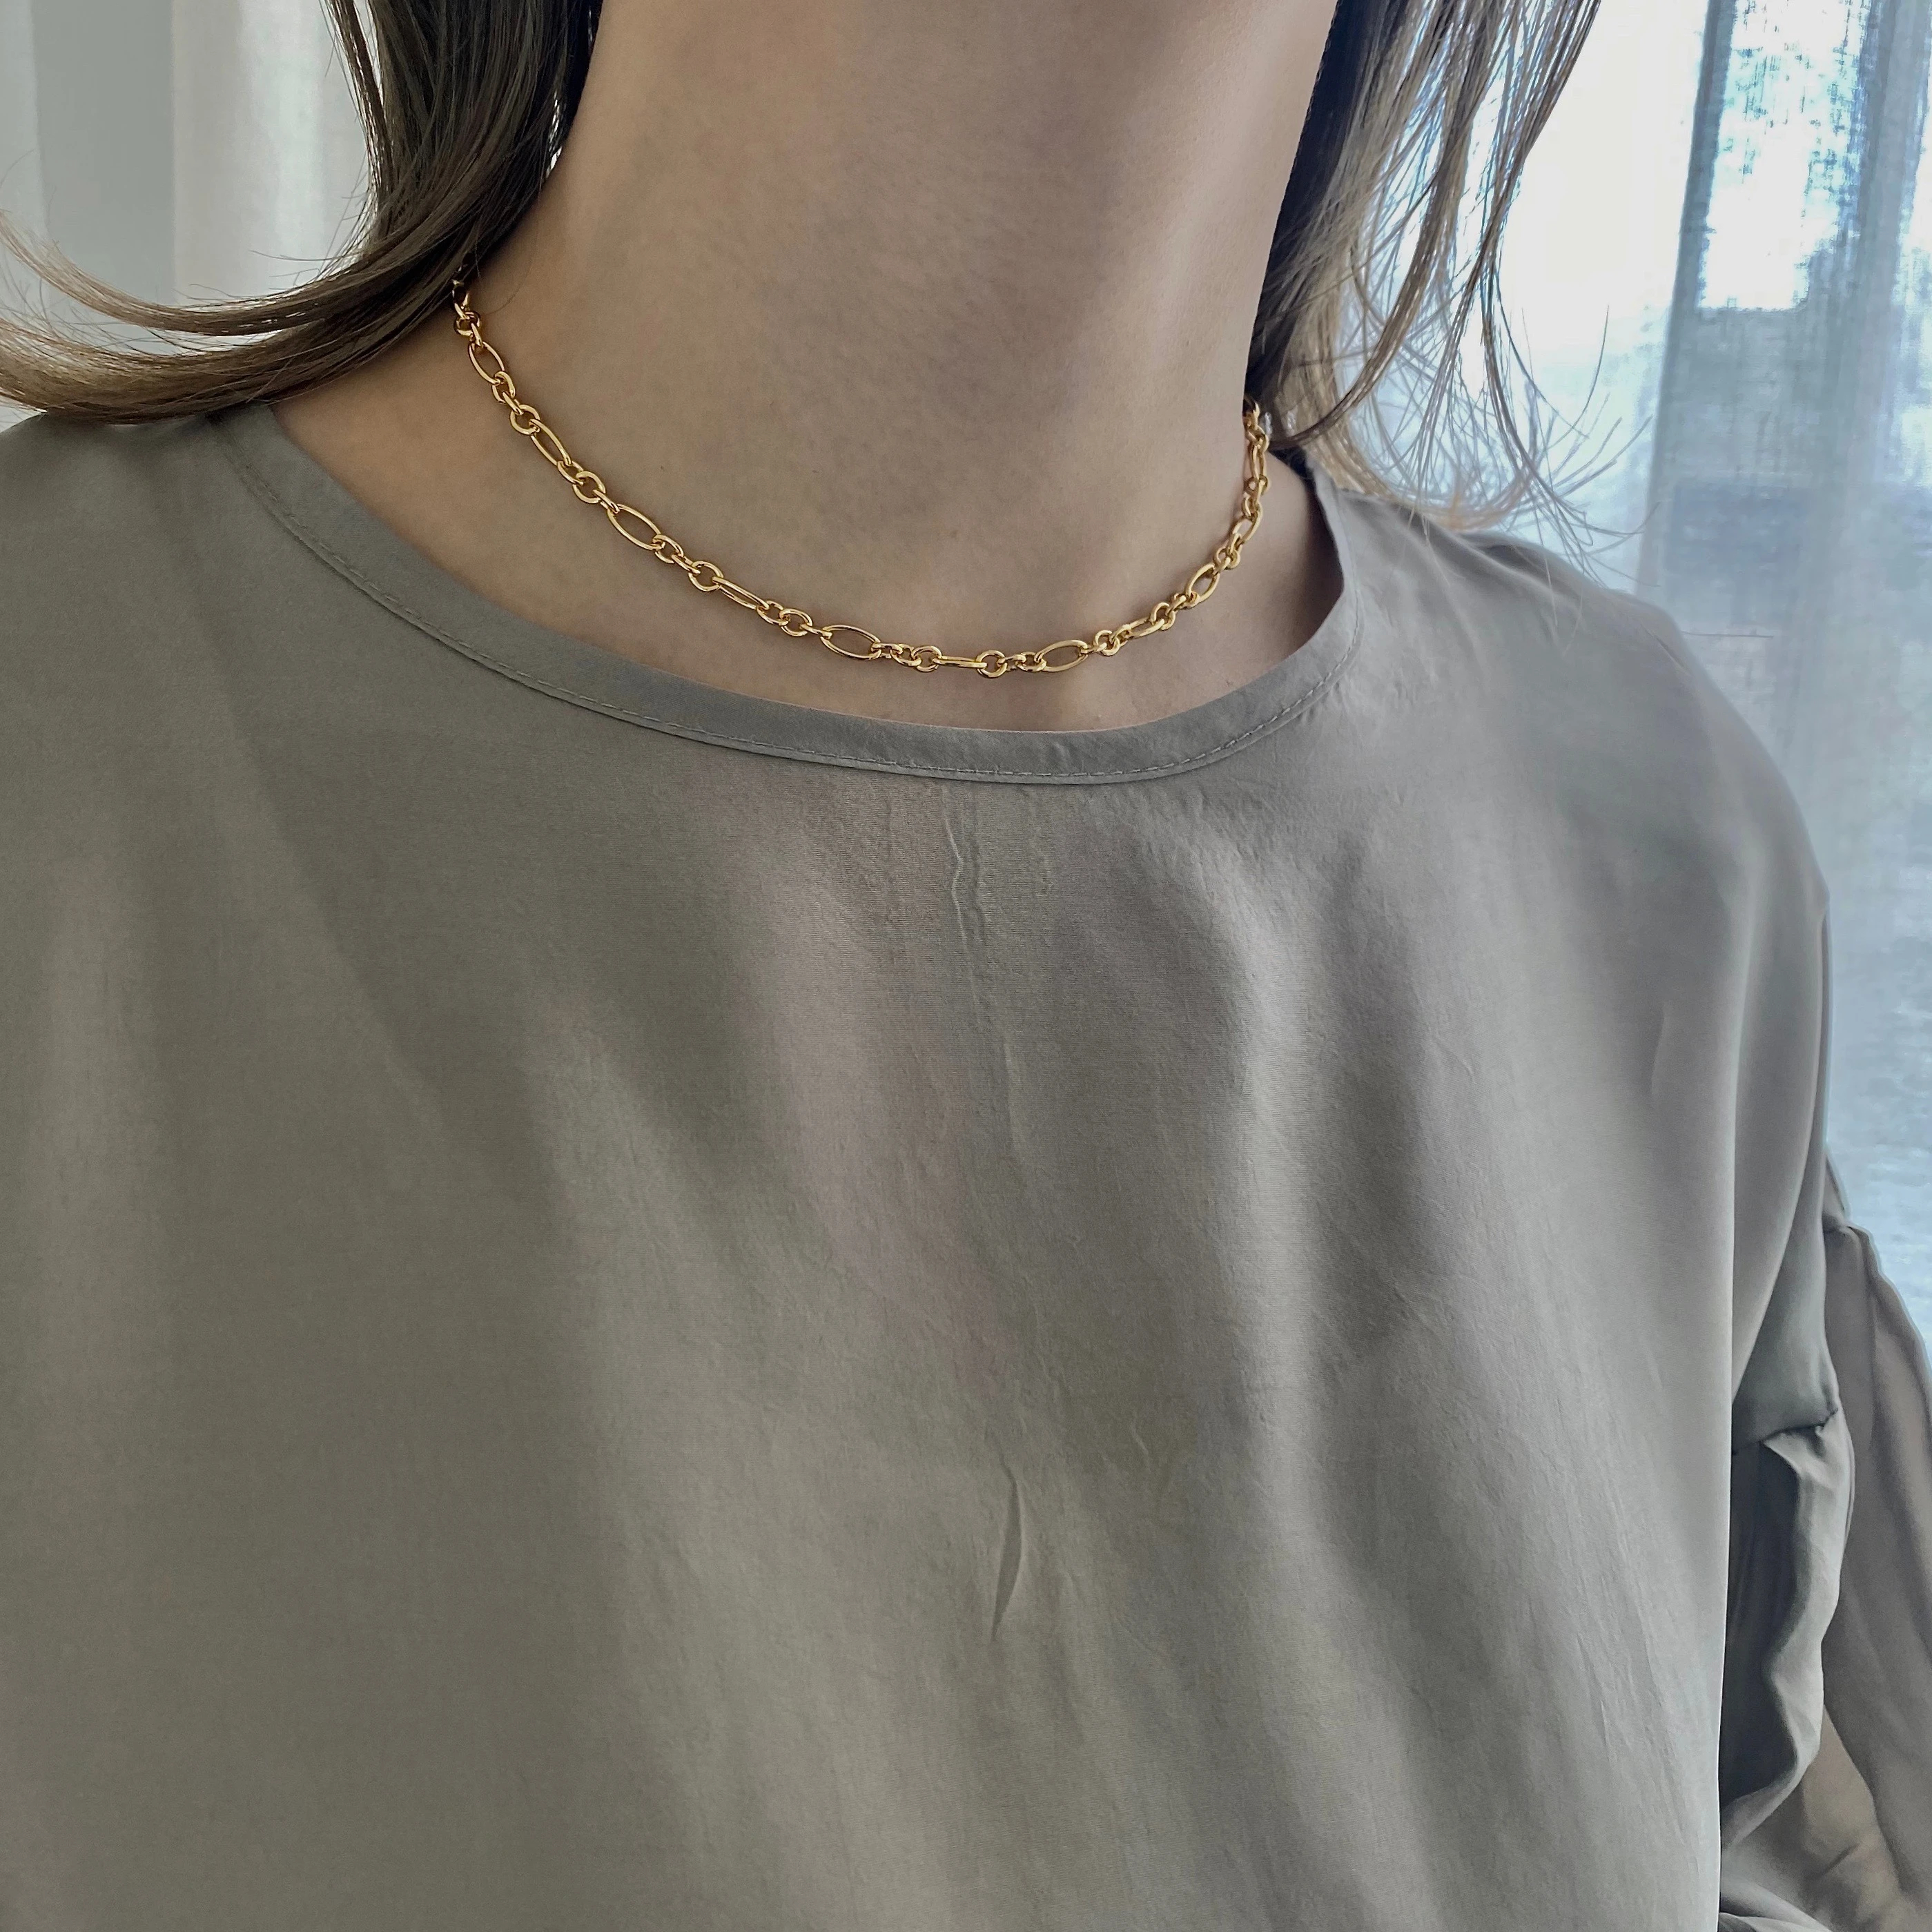 rugged chain necklace / willfully（ウィルフリー）のnecklace通販 